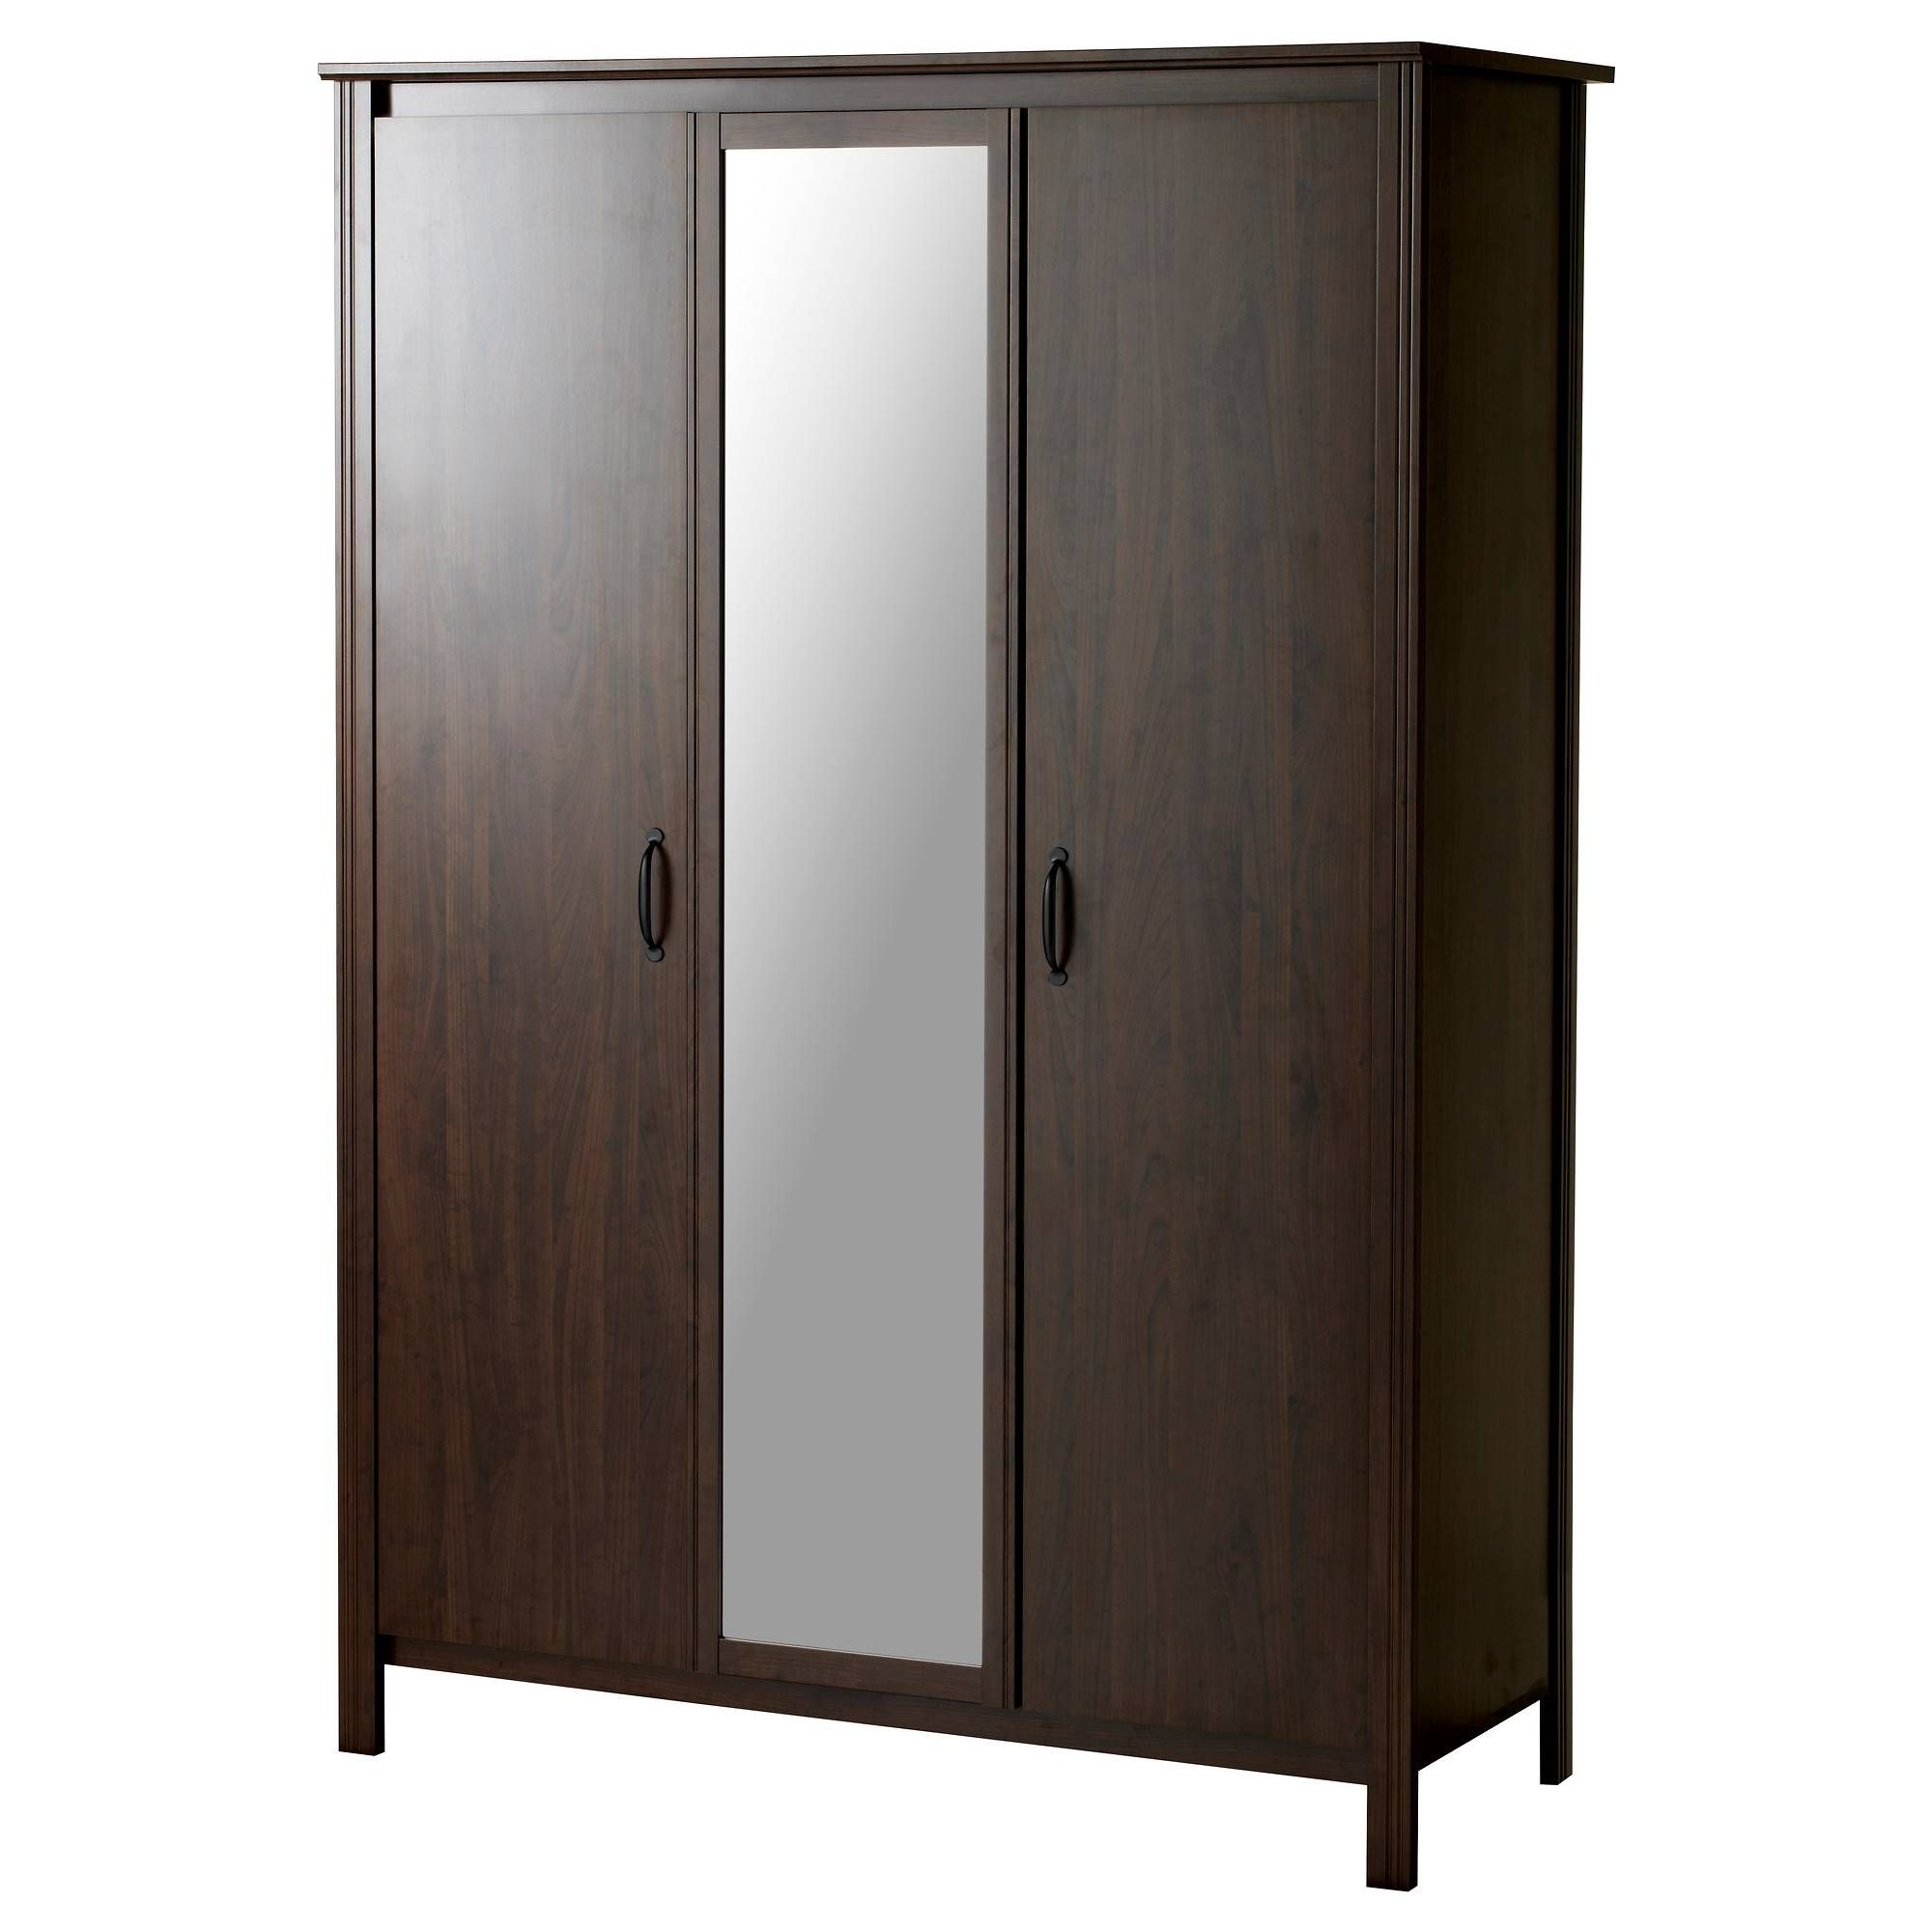 Wardrobes, Armoires & Closets – Ikea Intended For Corner Wardrobe Closet Ikea (View 17 of 30)